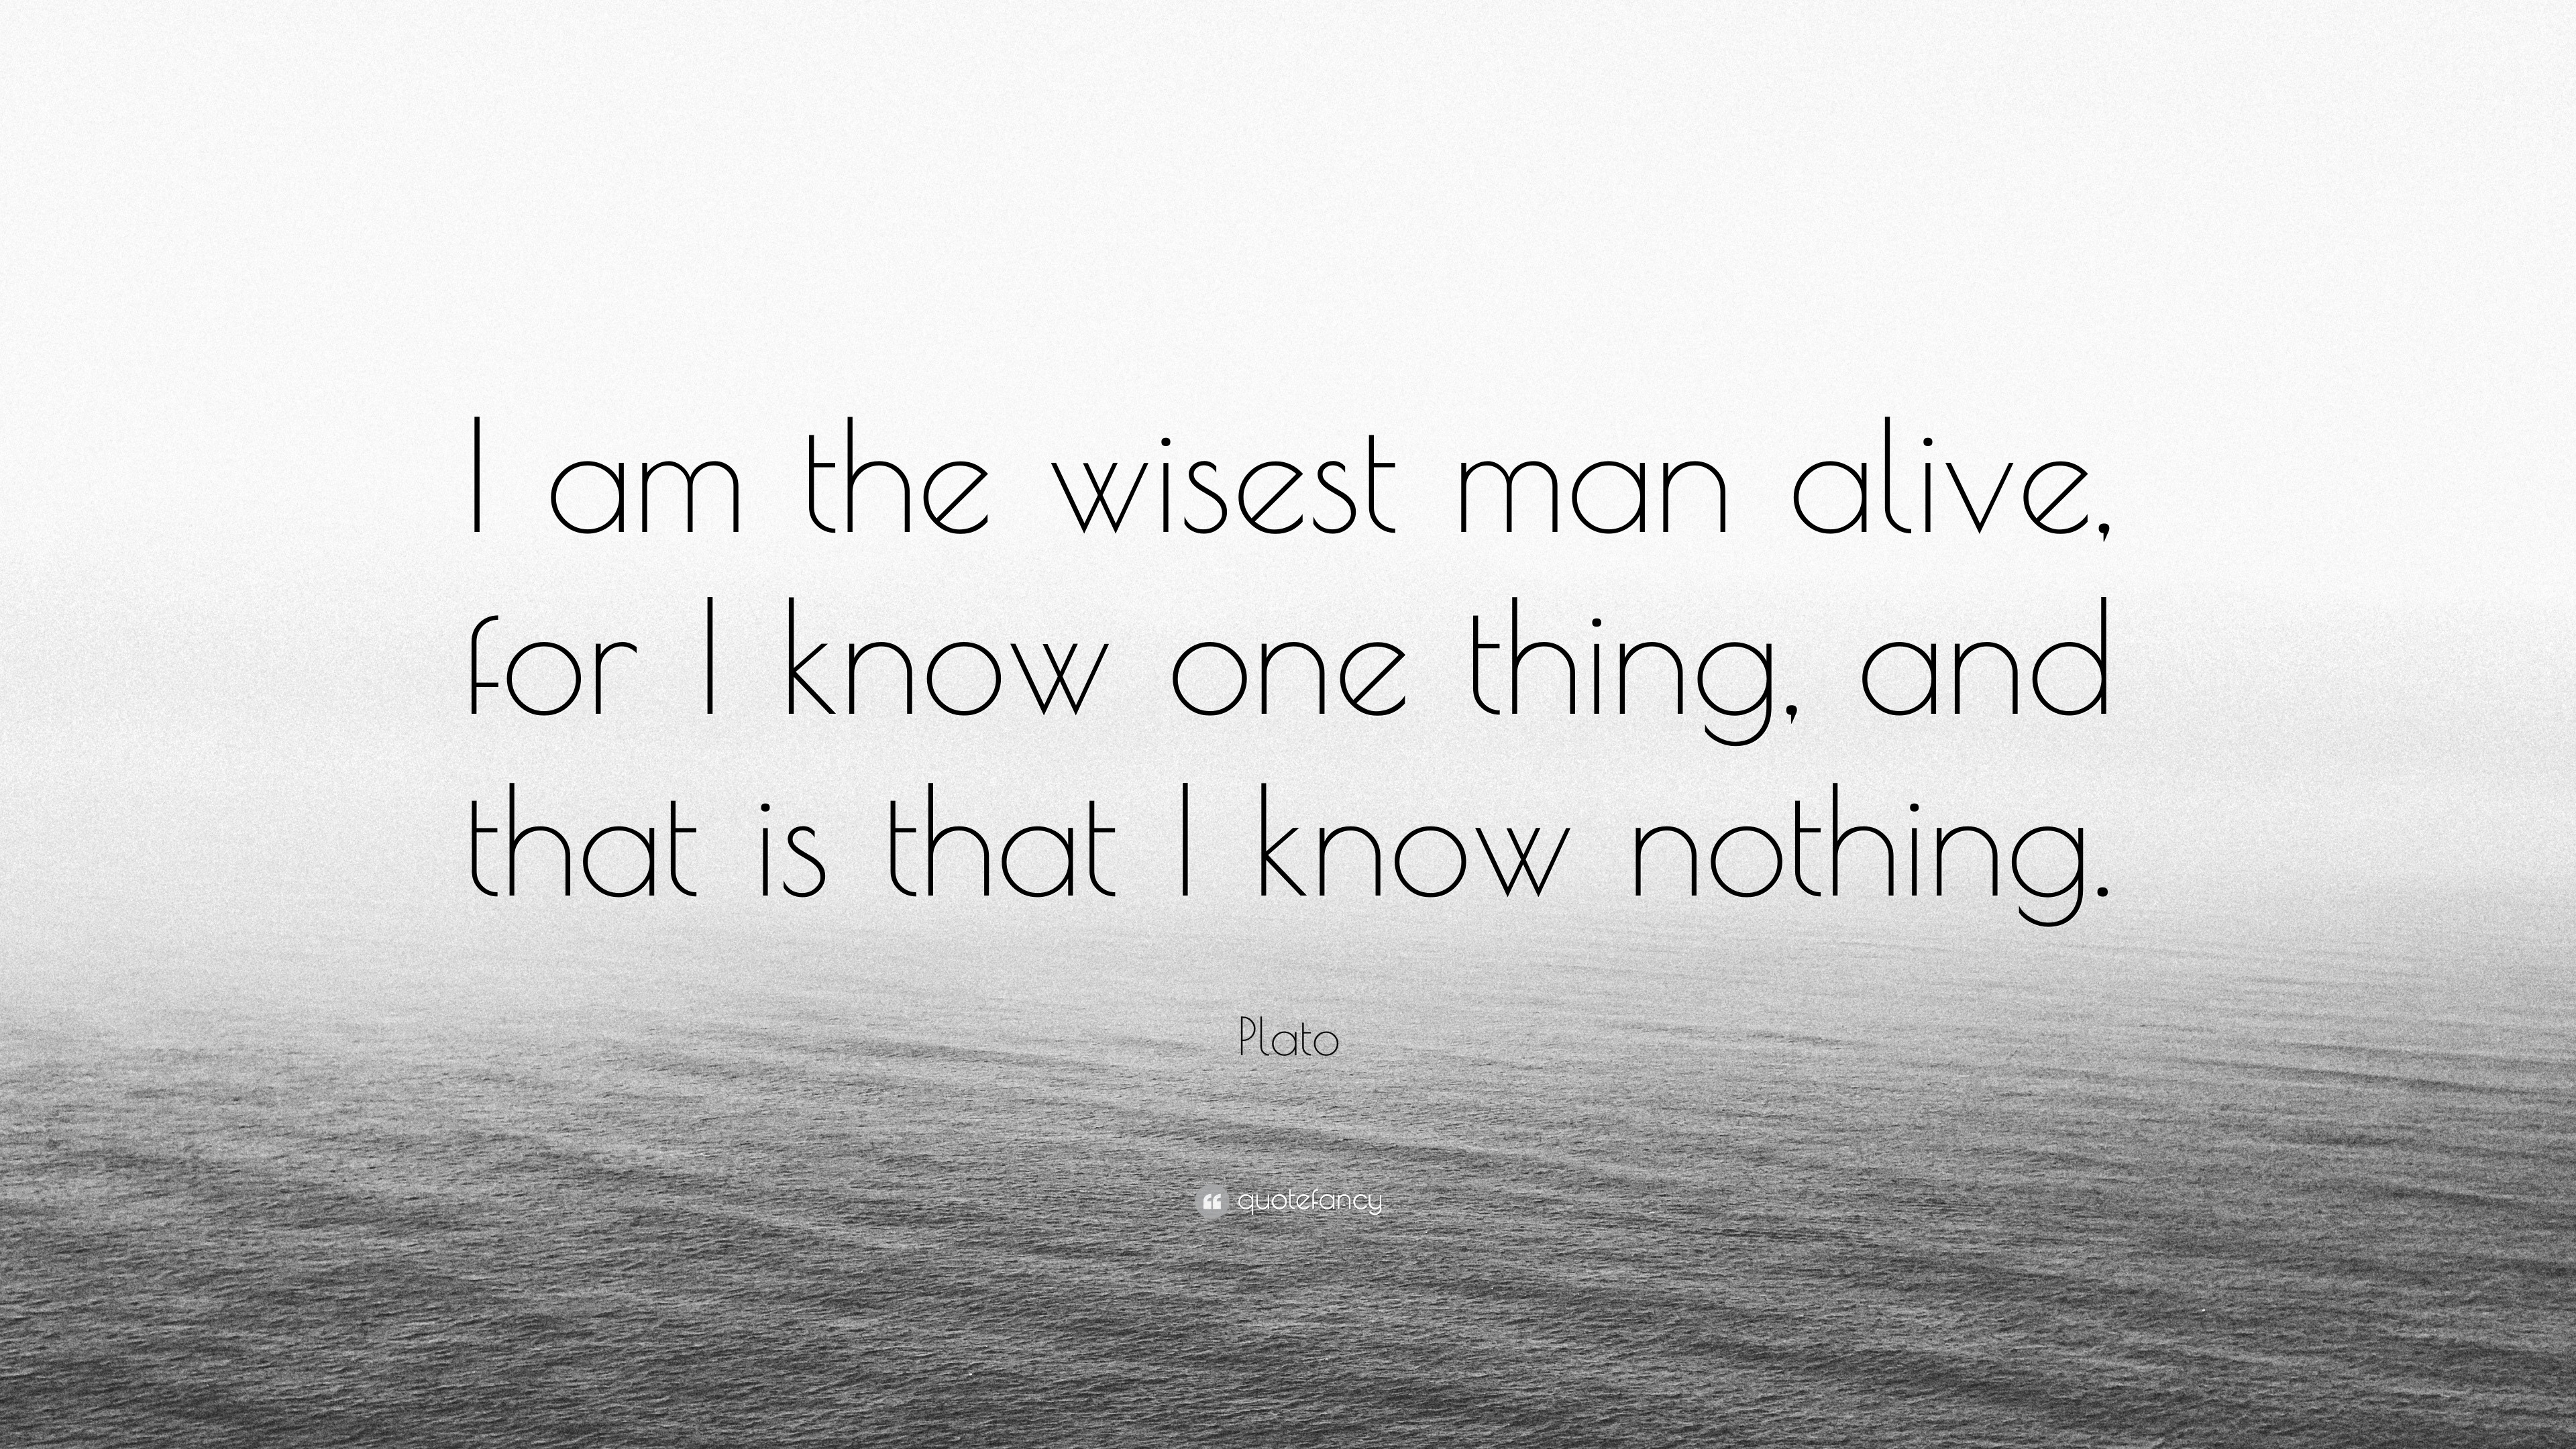 Plato Quote: “I am the wisest man alive, for I know one thing, and that ...